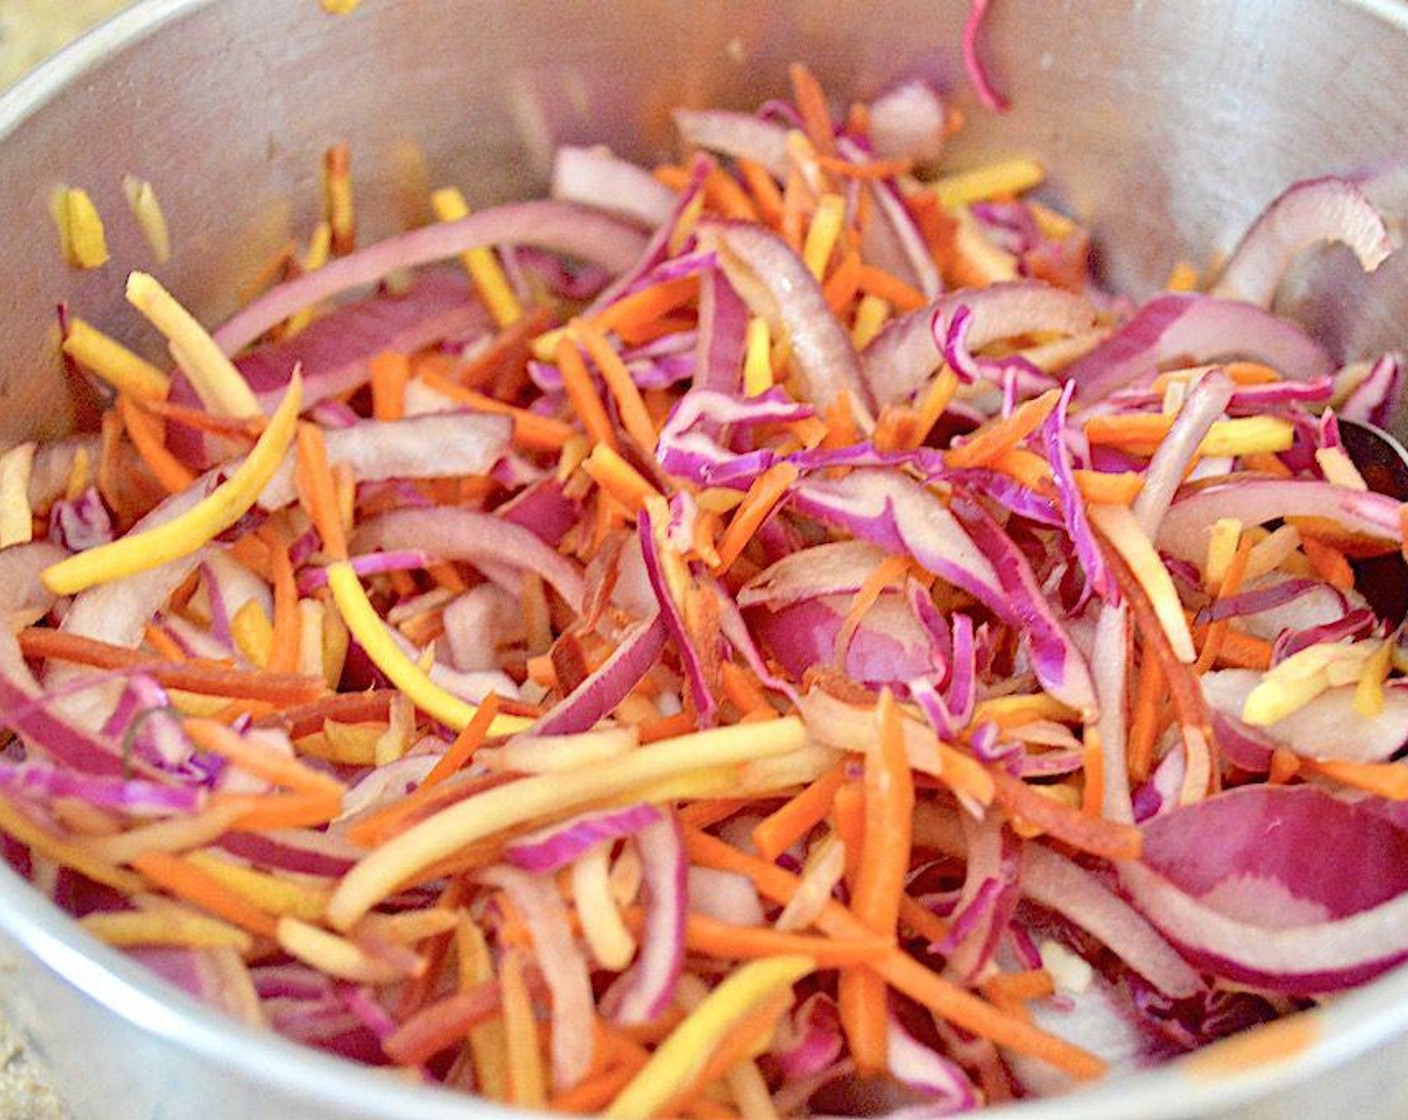 step 1 Make the slaw. Stir Red Cabbage (2 cups), Rainbow Carrots (2 cups), Red Onion (1/2), Lime (1), Soy Sauce (1 Tbsp), and Rice Vinegar (1 Tbsp) together thoroughly in a bowl. Set it aside to let the flavors marry and the liquids wilt the veggies a little while you make everything else